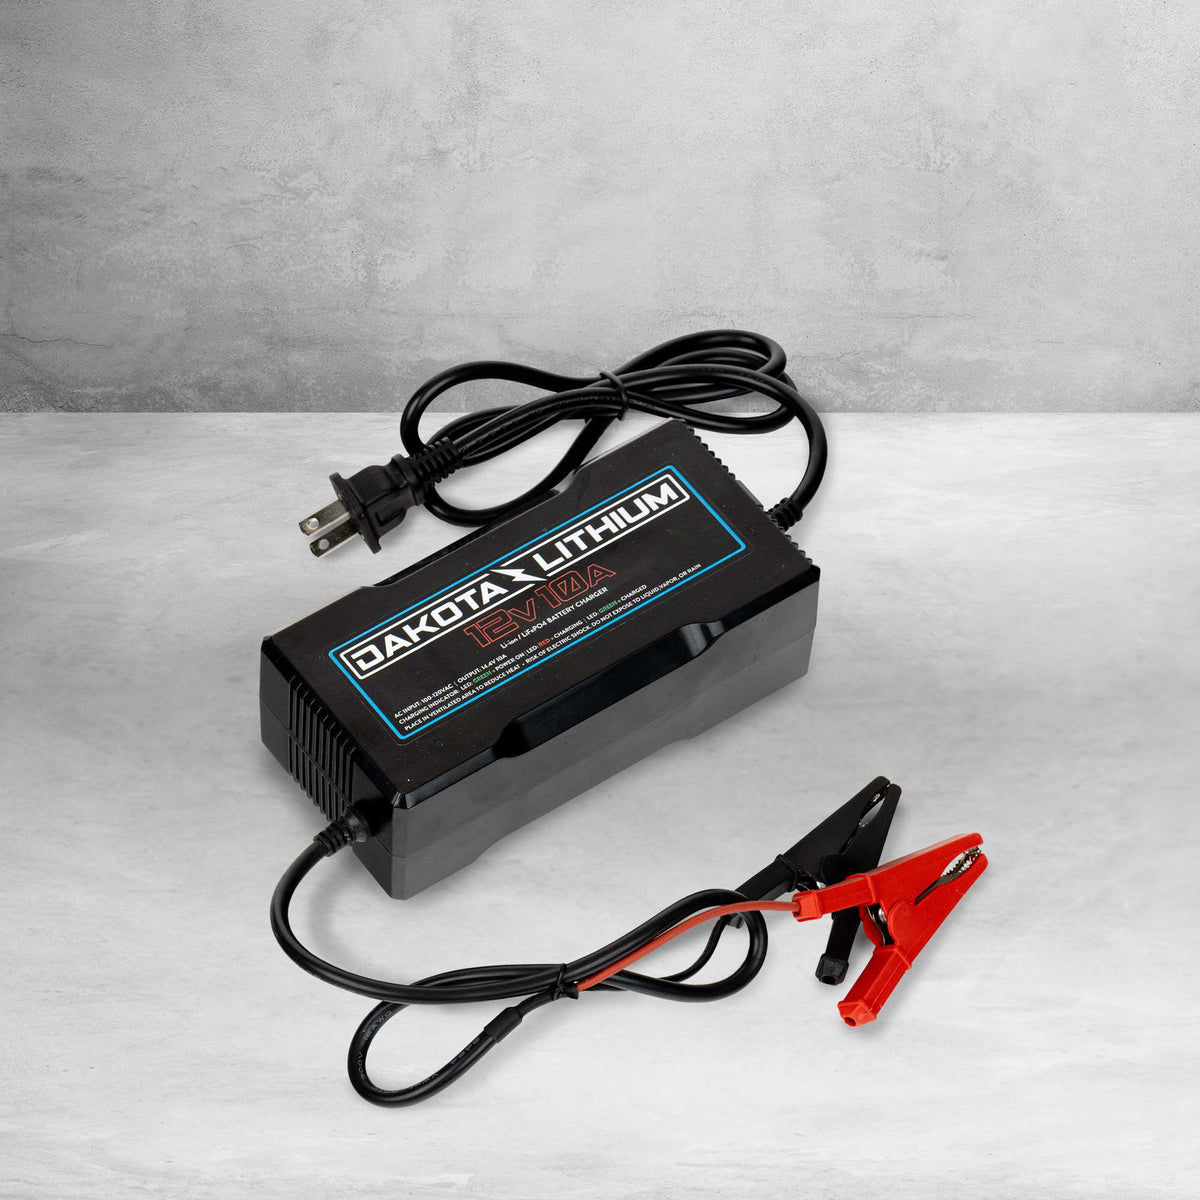 Dakota Lithium | 12V 100Ah LiFePO4 Battery | Free Charger Included